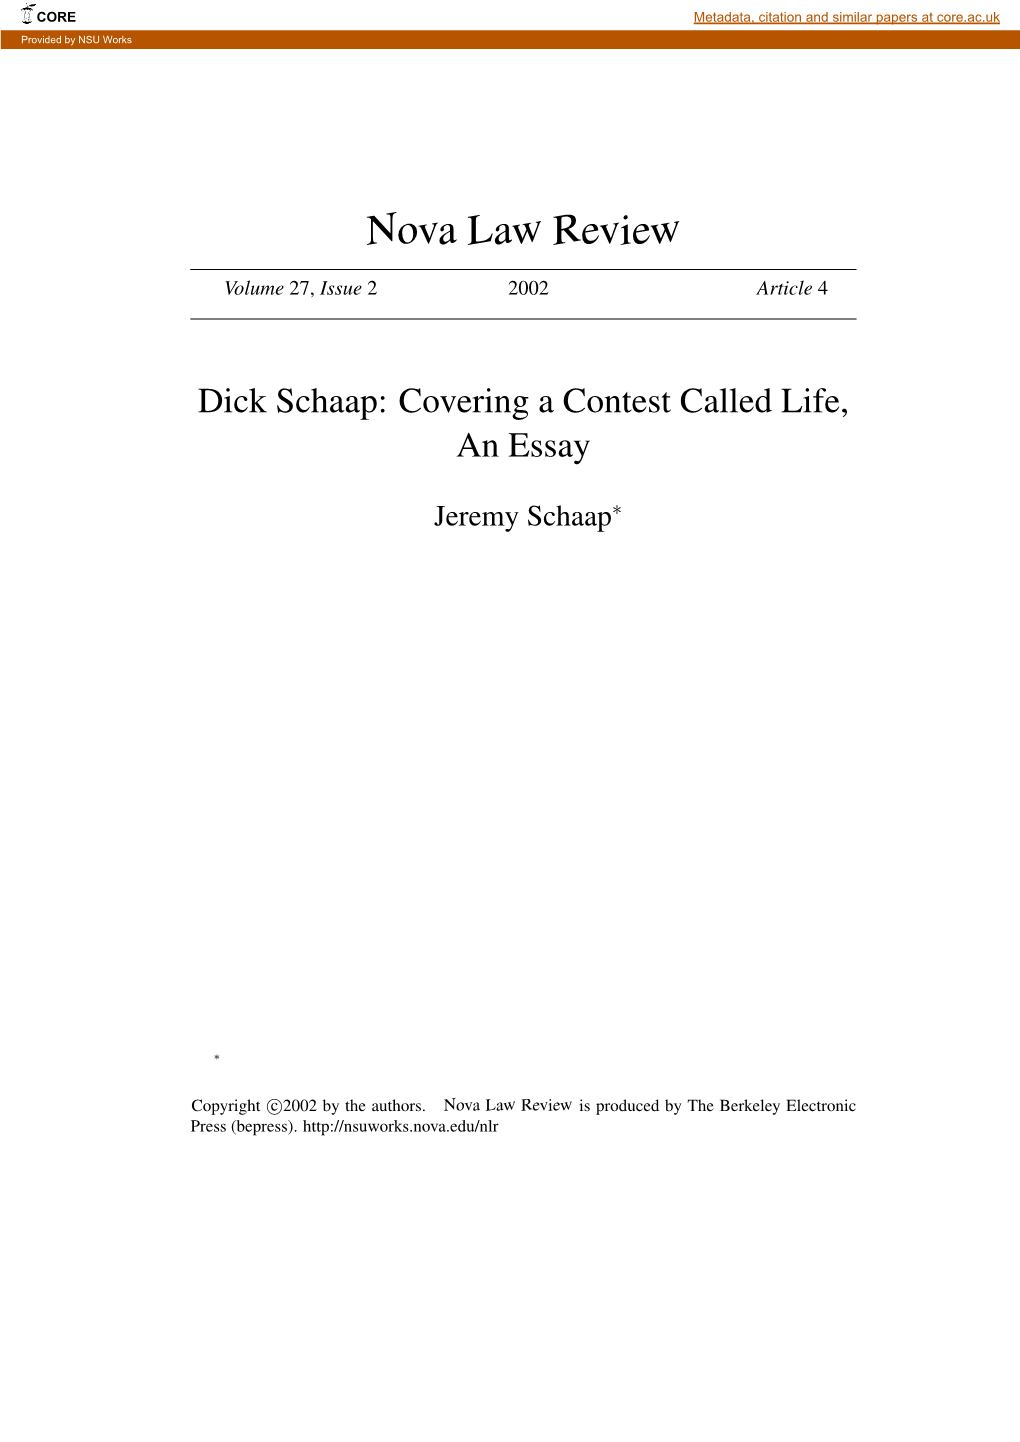 Dick Schaap: Covering a Contest Called Life, an Essay